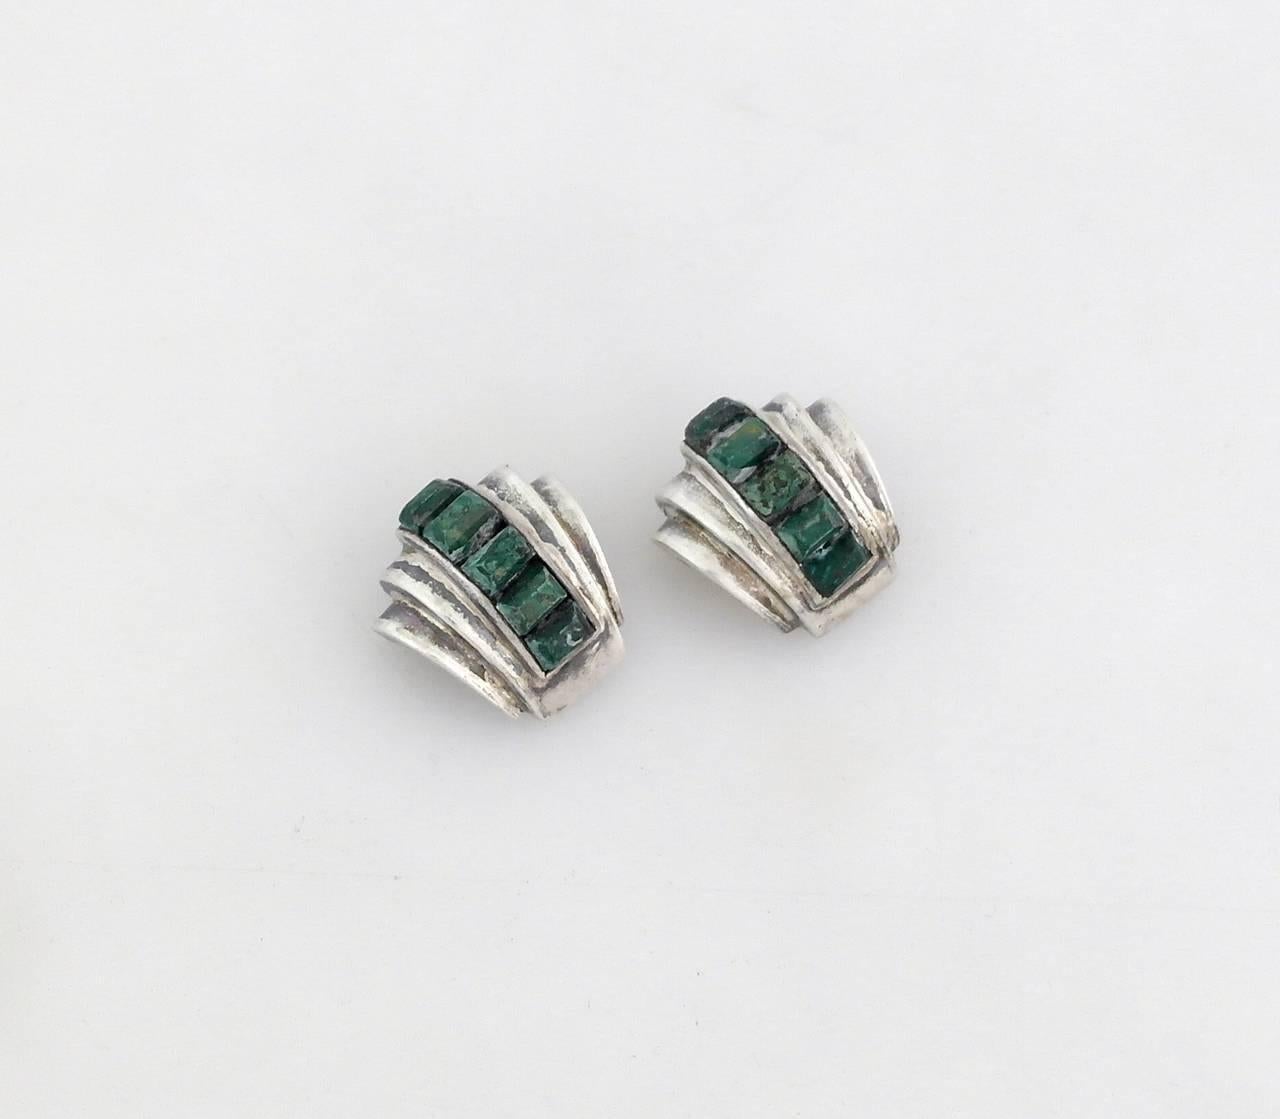 Being offered are a pair of circa 1955 .970 silver pins by Antonio Pineda of Taxco, Mexico. Pins adorned with Mexican jade stone, set in a sleek modernist design. Dimensions: 1 inch by 1 inch.  Marked as illustrated. In excellent condition. 